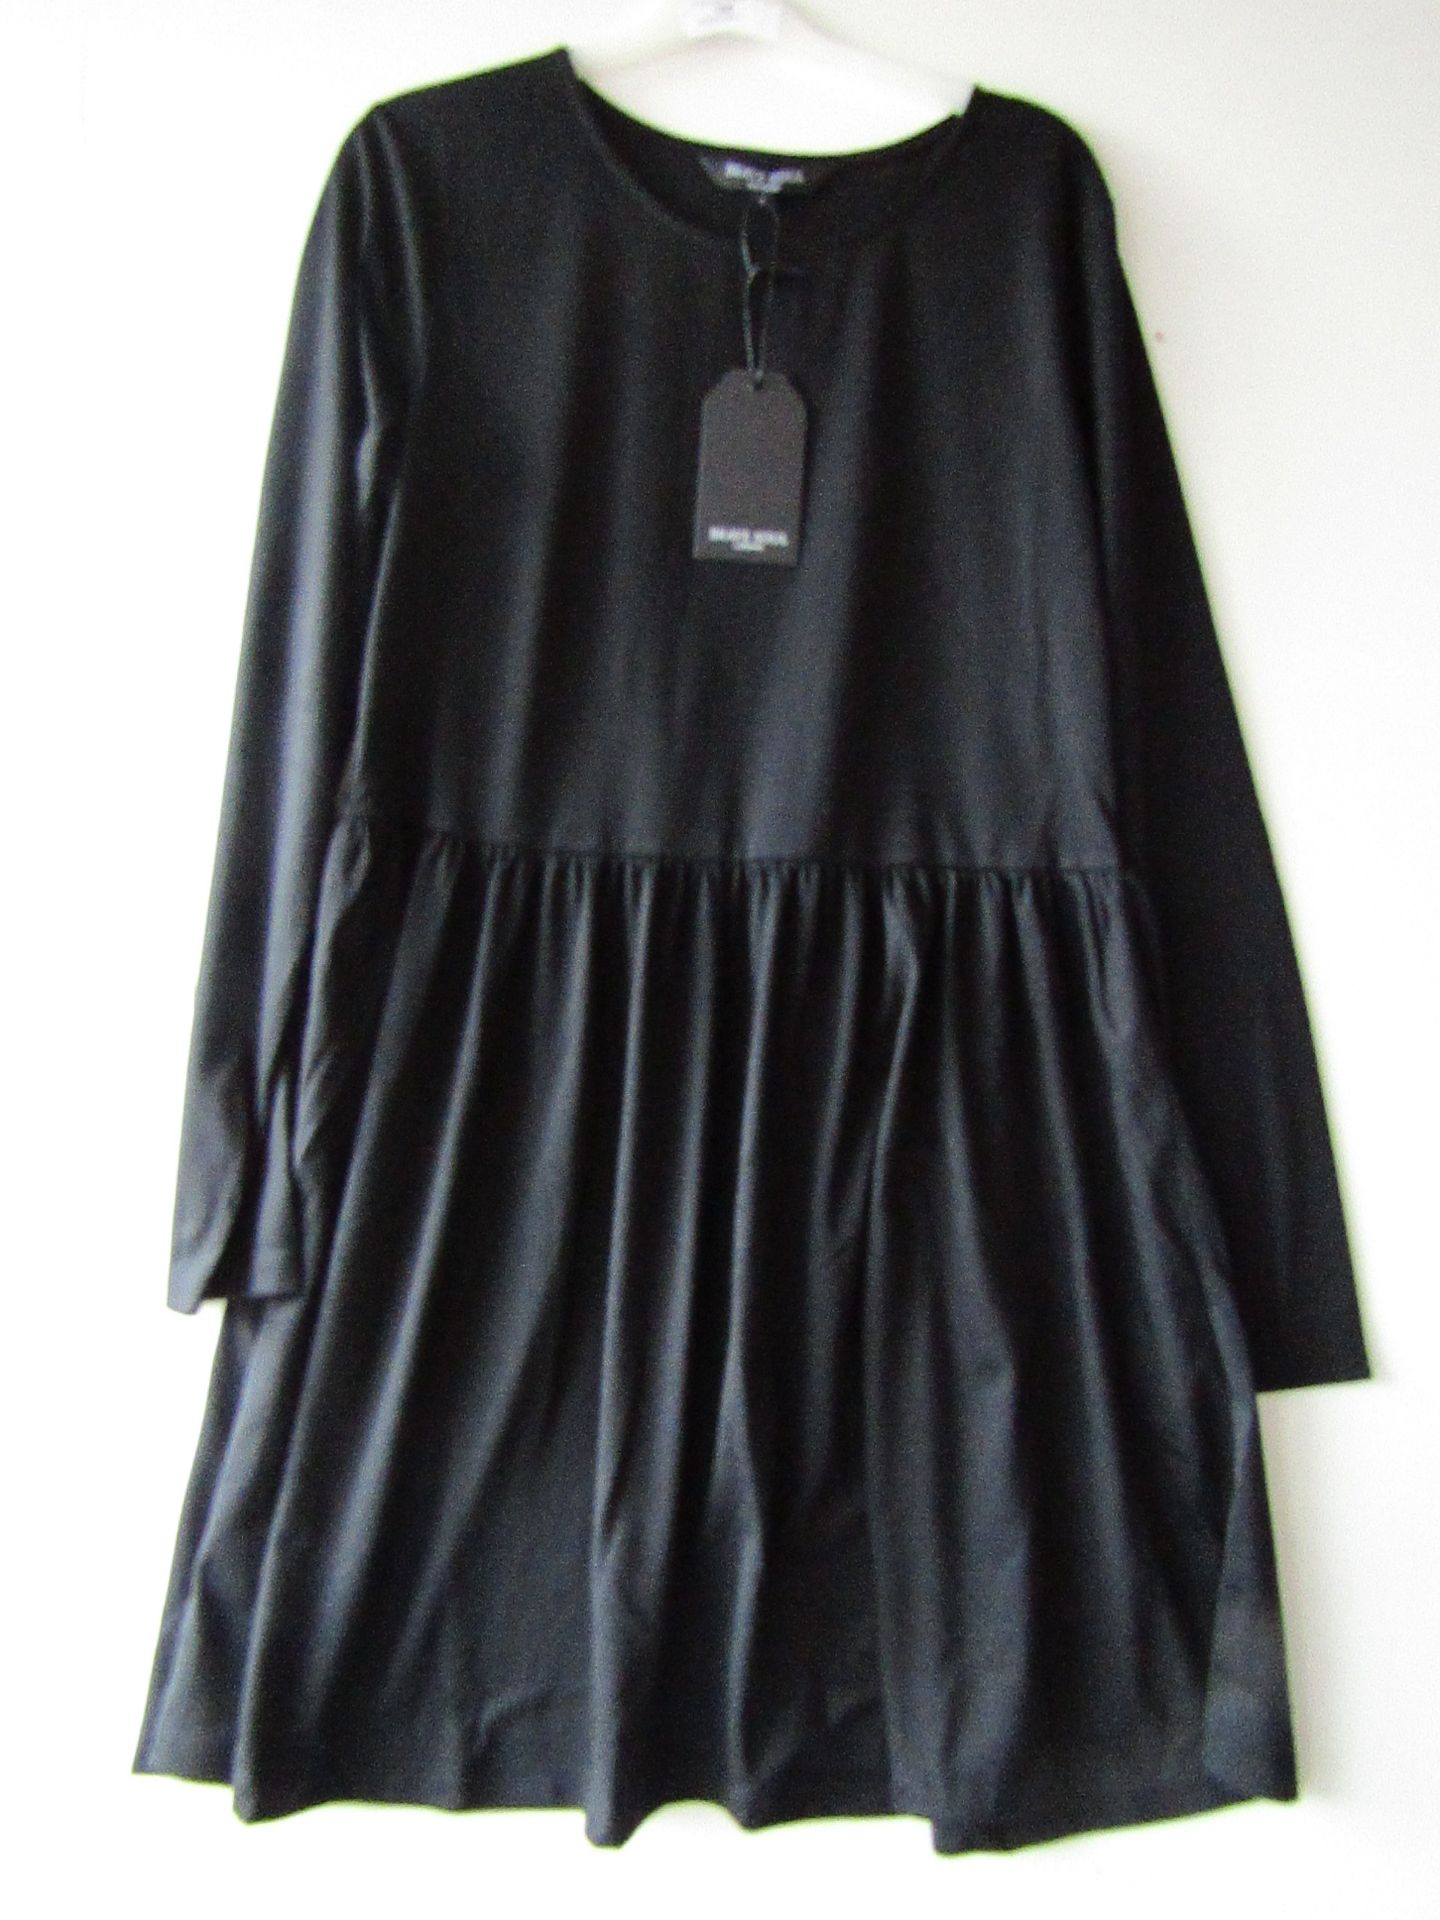 Ladies Brave Soul Long sleeved Dress. With tags New Sample. Size L